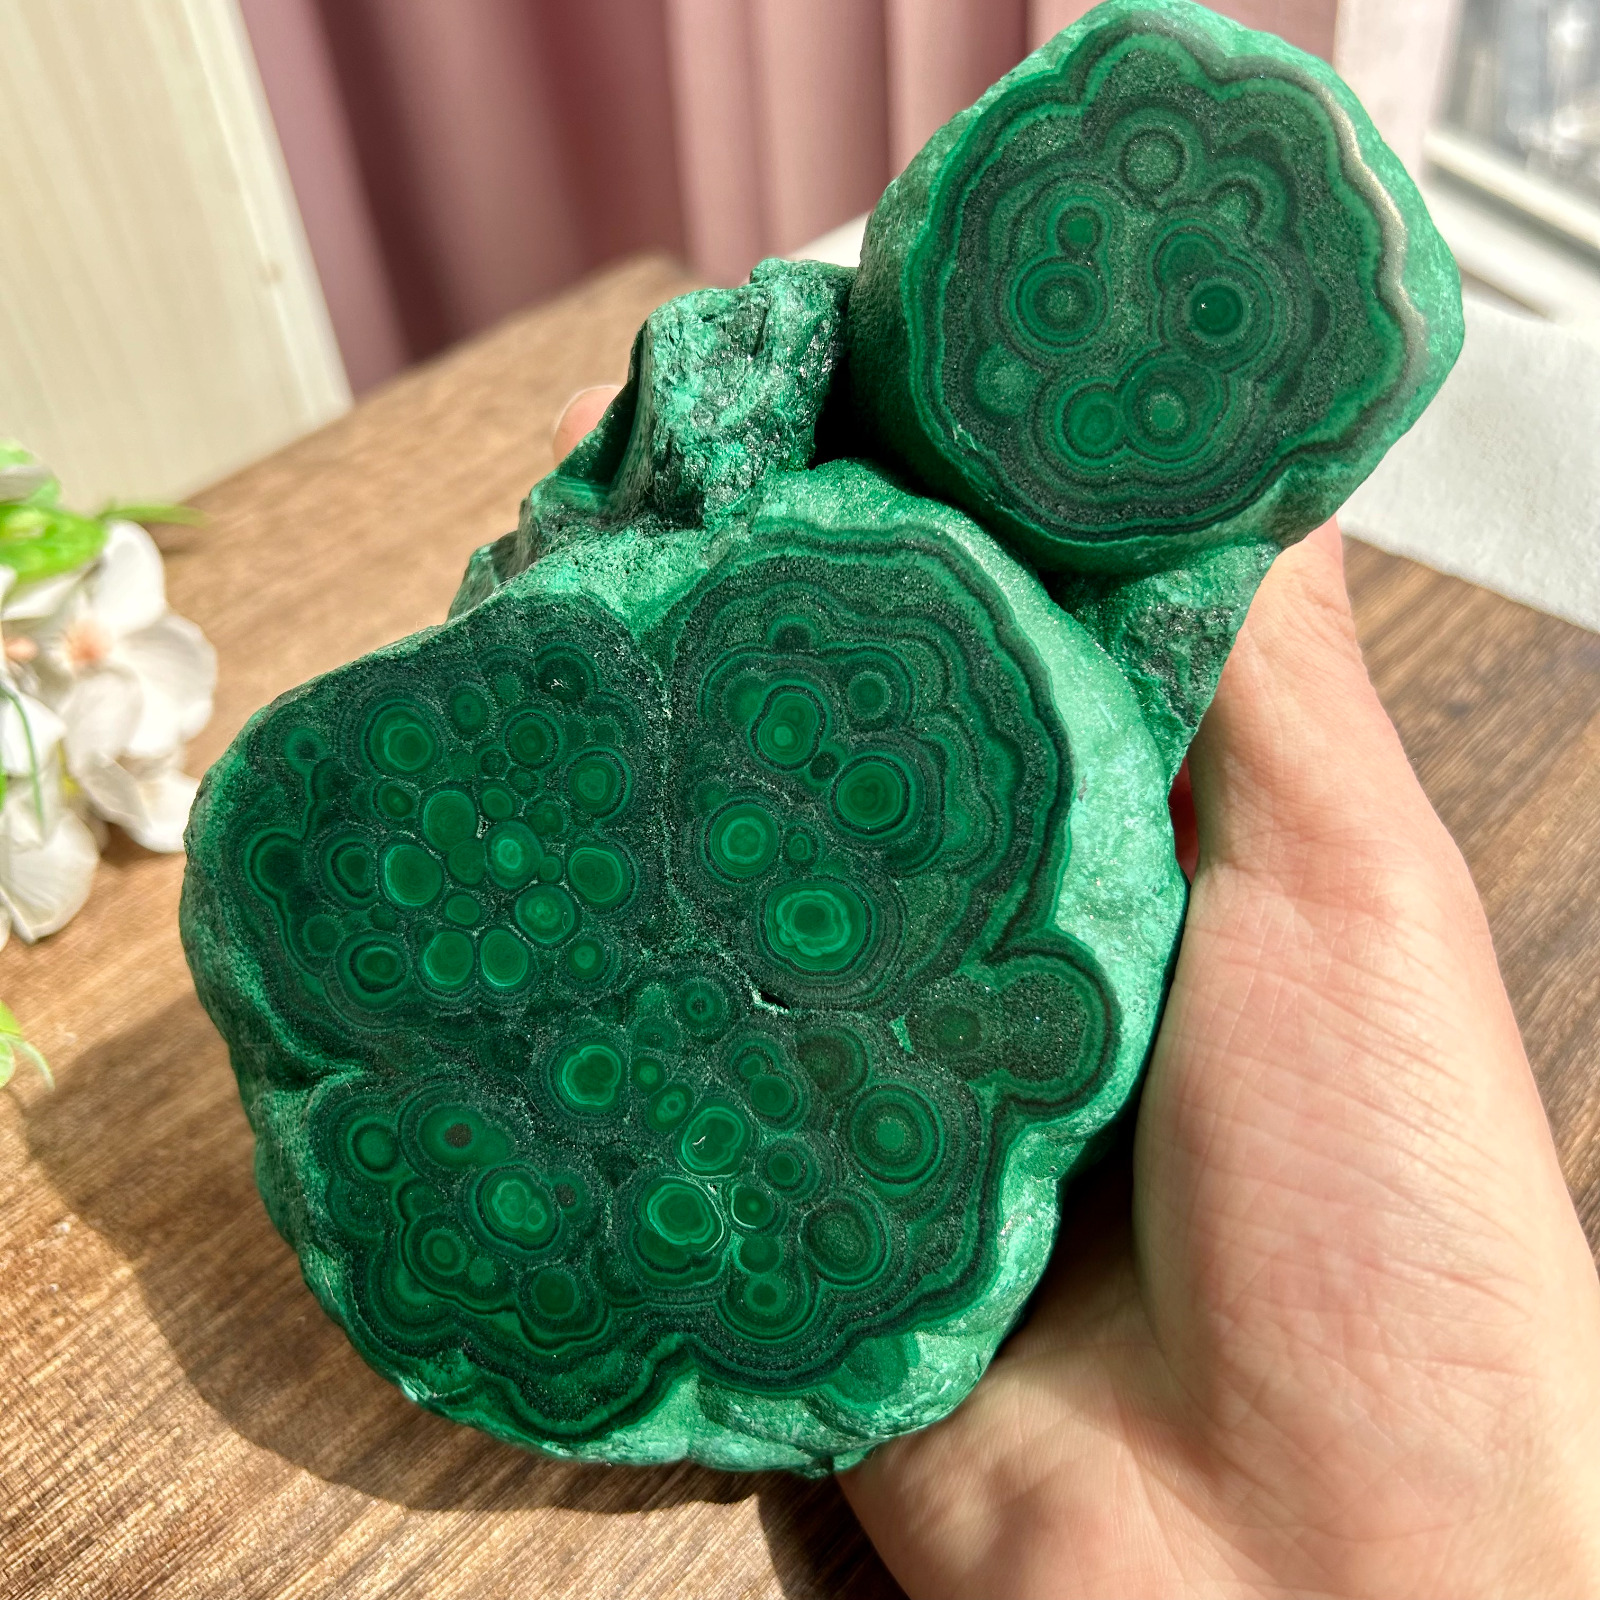 1595g Natural Rough Raw Malachite Crystal Mineral Specimen collection